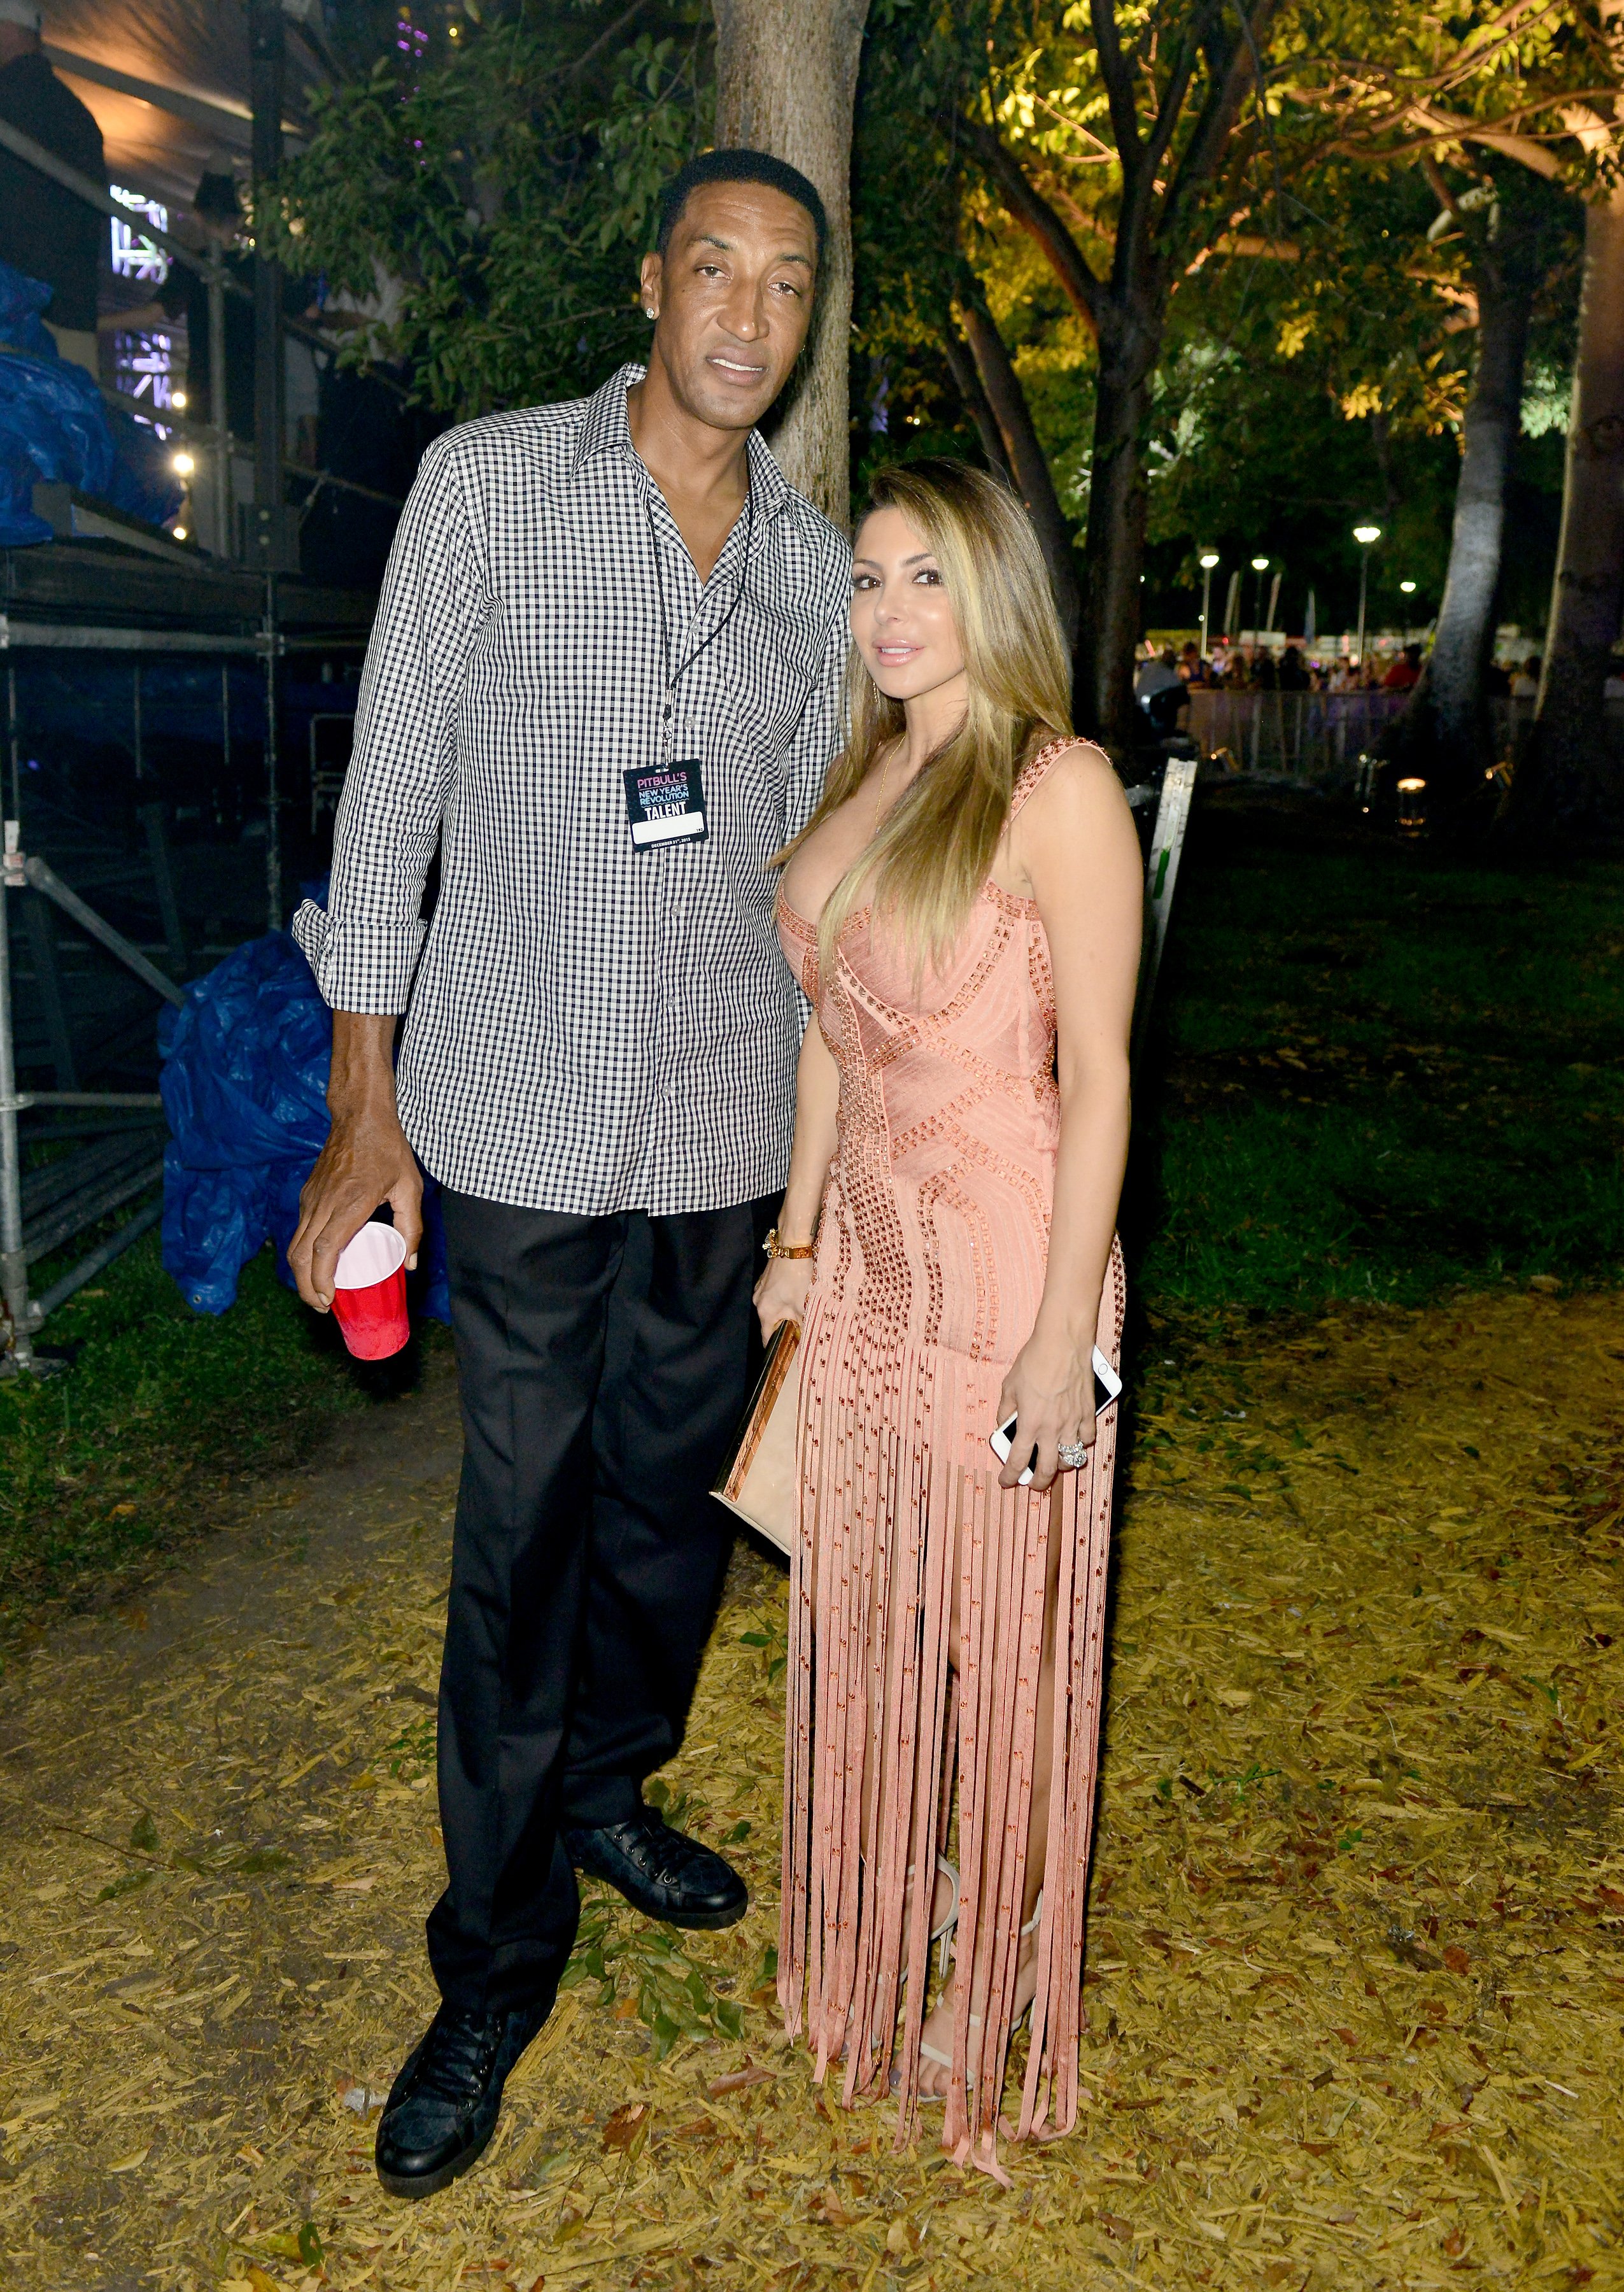 Scottie Pippen and Larsa Pippen backstage at the Pitbulls New Years Eve Revolution 2015 at Bayfront Park Amphitheater on December 31, 2015 in Miami, Florida | Photo: GettyImages